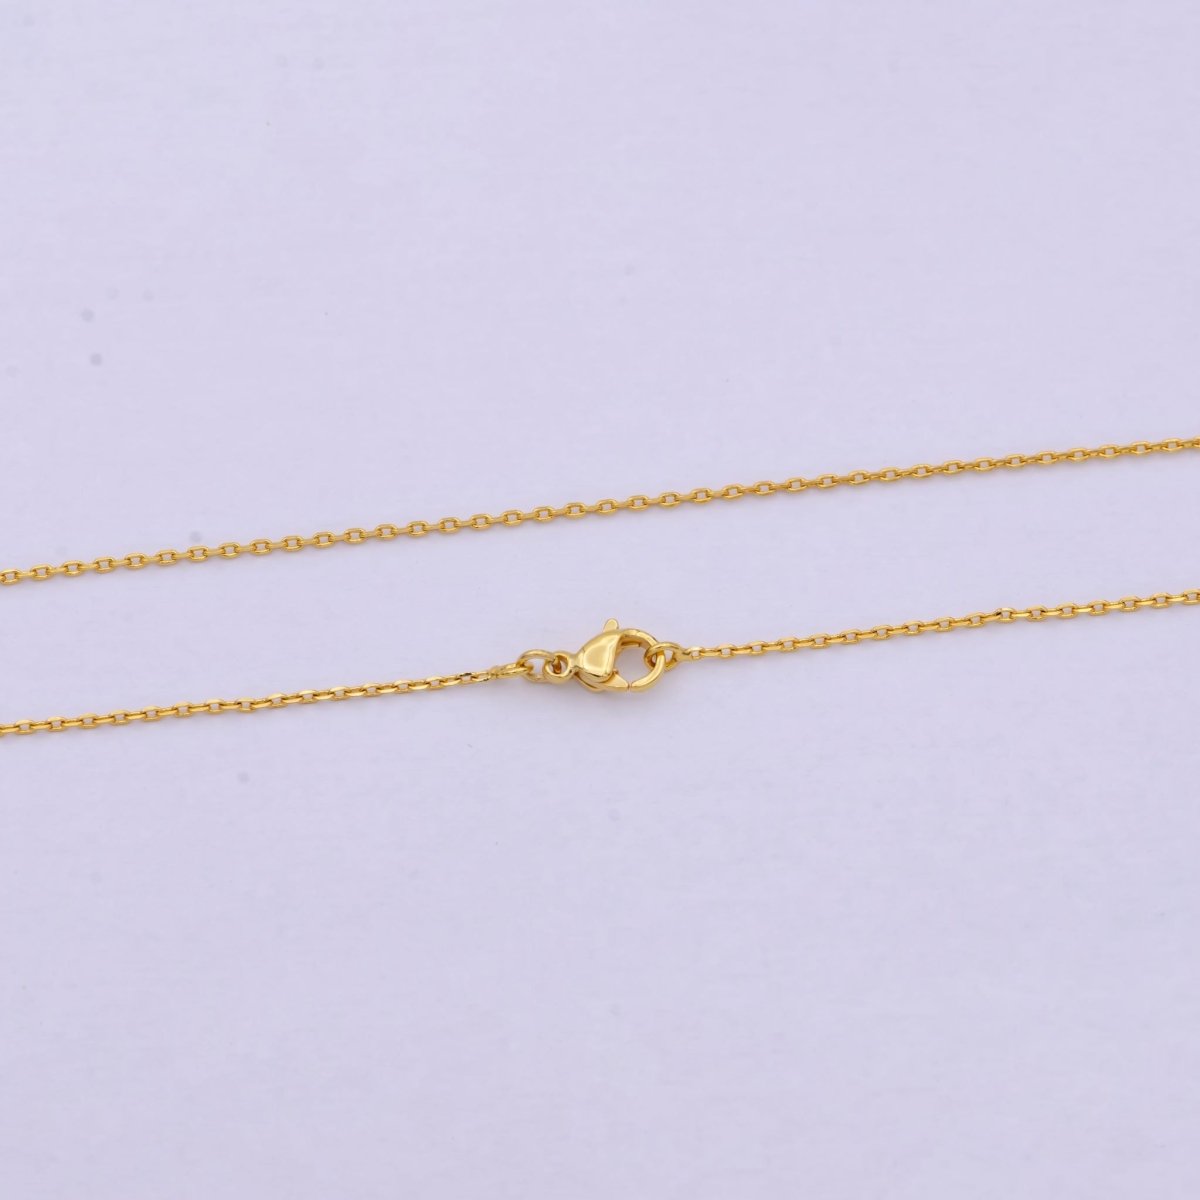 24K Gold Filled Chain Necklace, Dainty 0.9mm Cable Finished Chain, 17.5" Inch Layering Necklace | WA-615 Clearance Pricing - DLUXCA